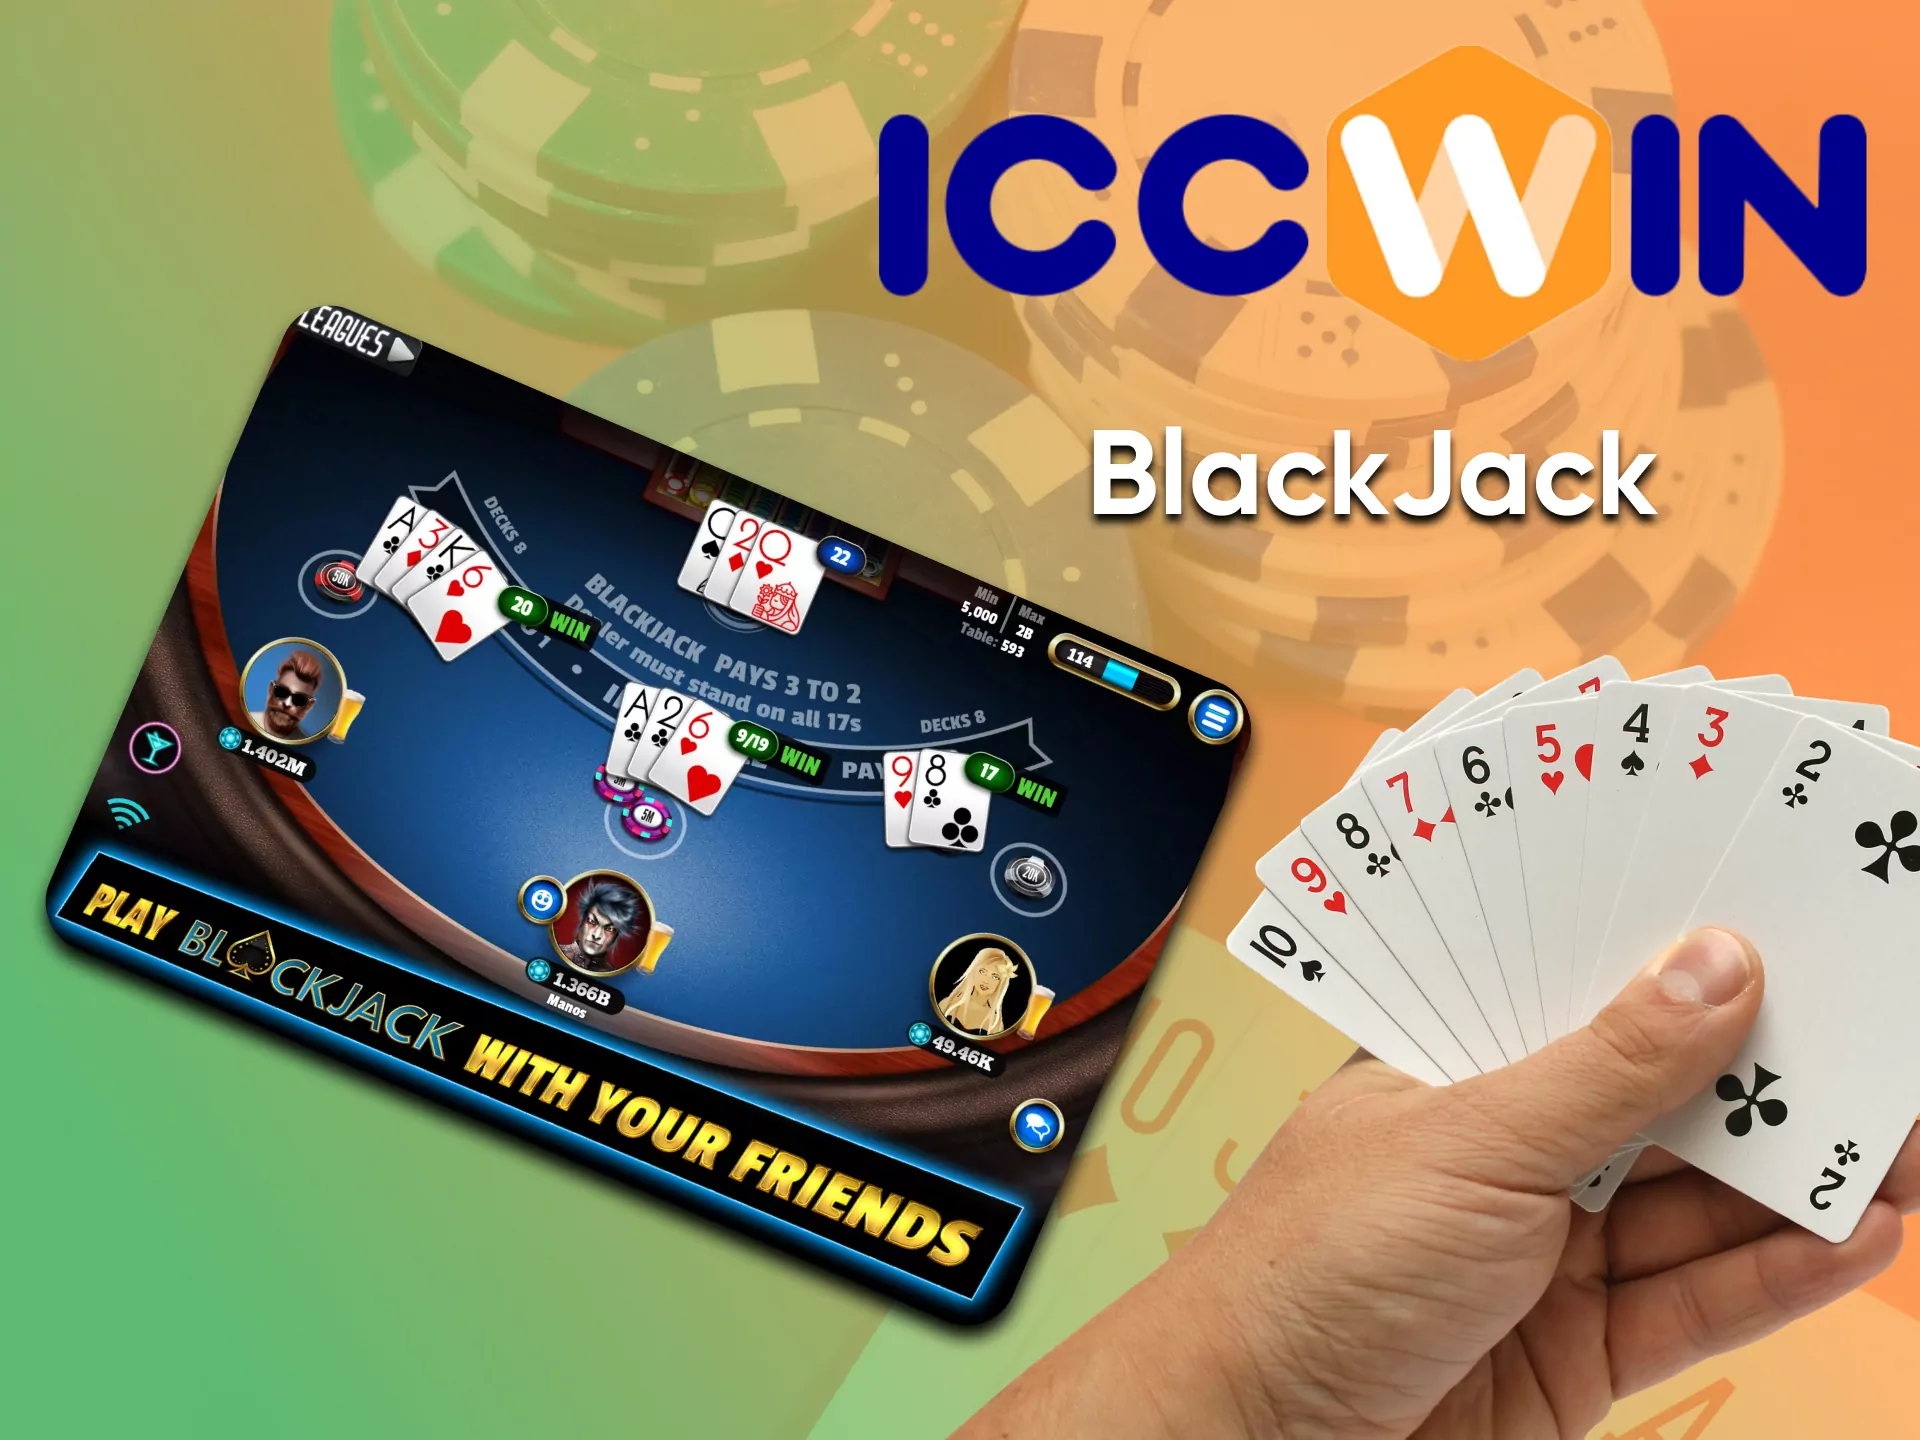 Play BlackJack in the casino section of ICCWin.